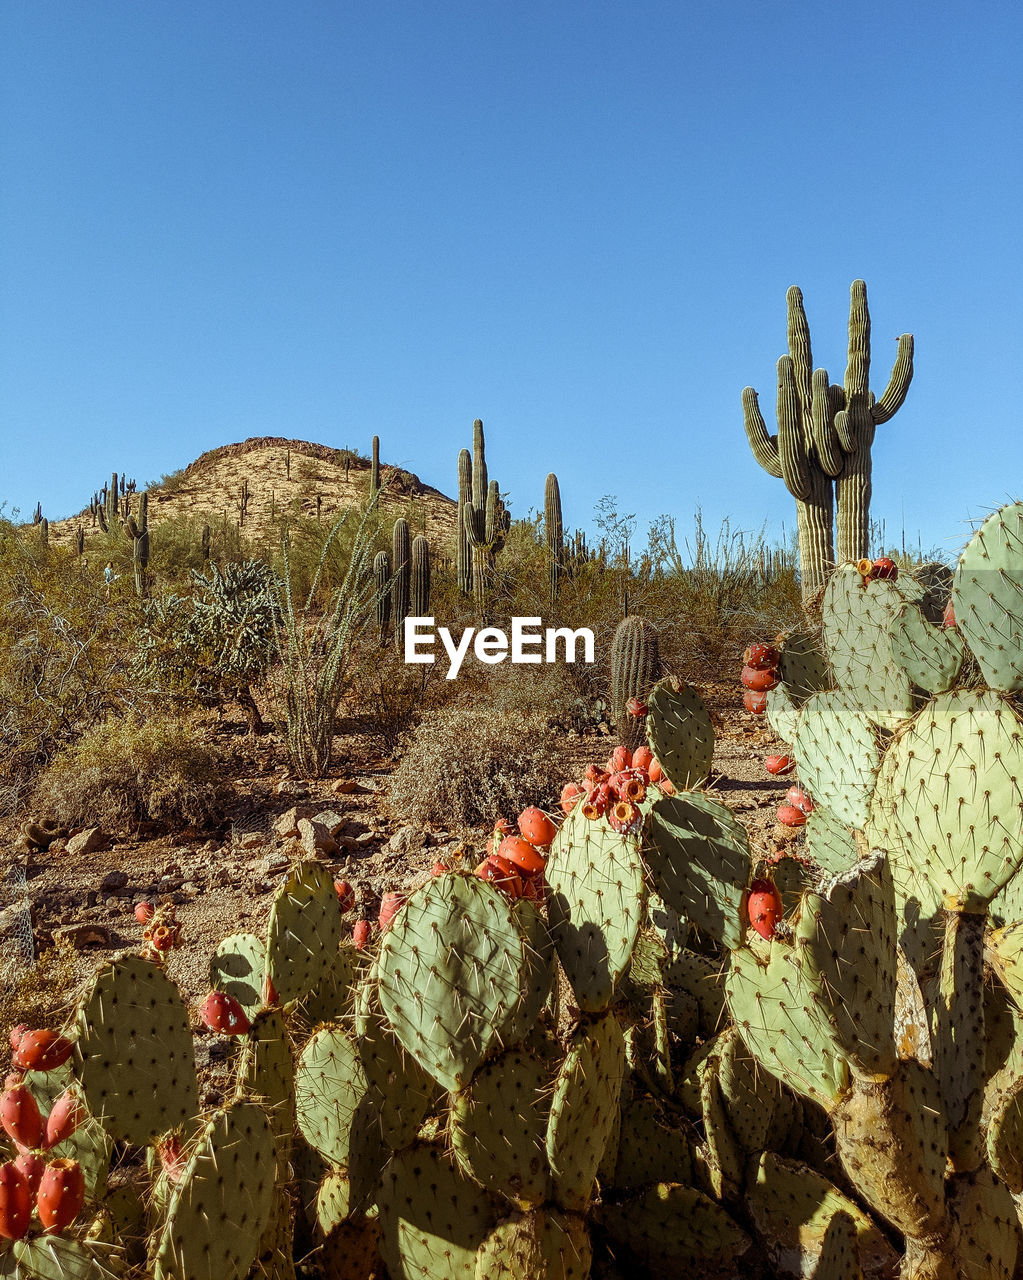 Cactus growing on land against clear sky